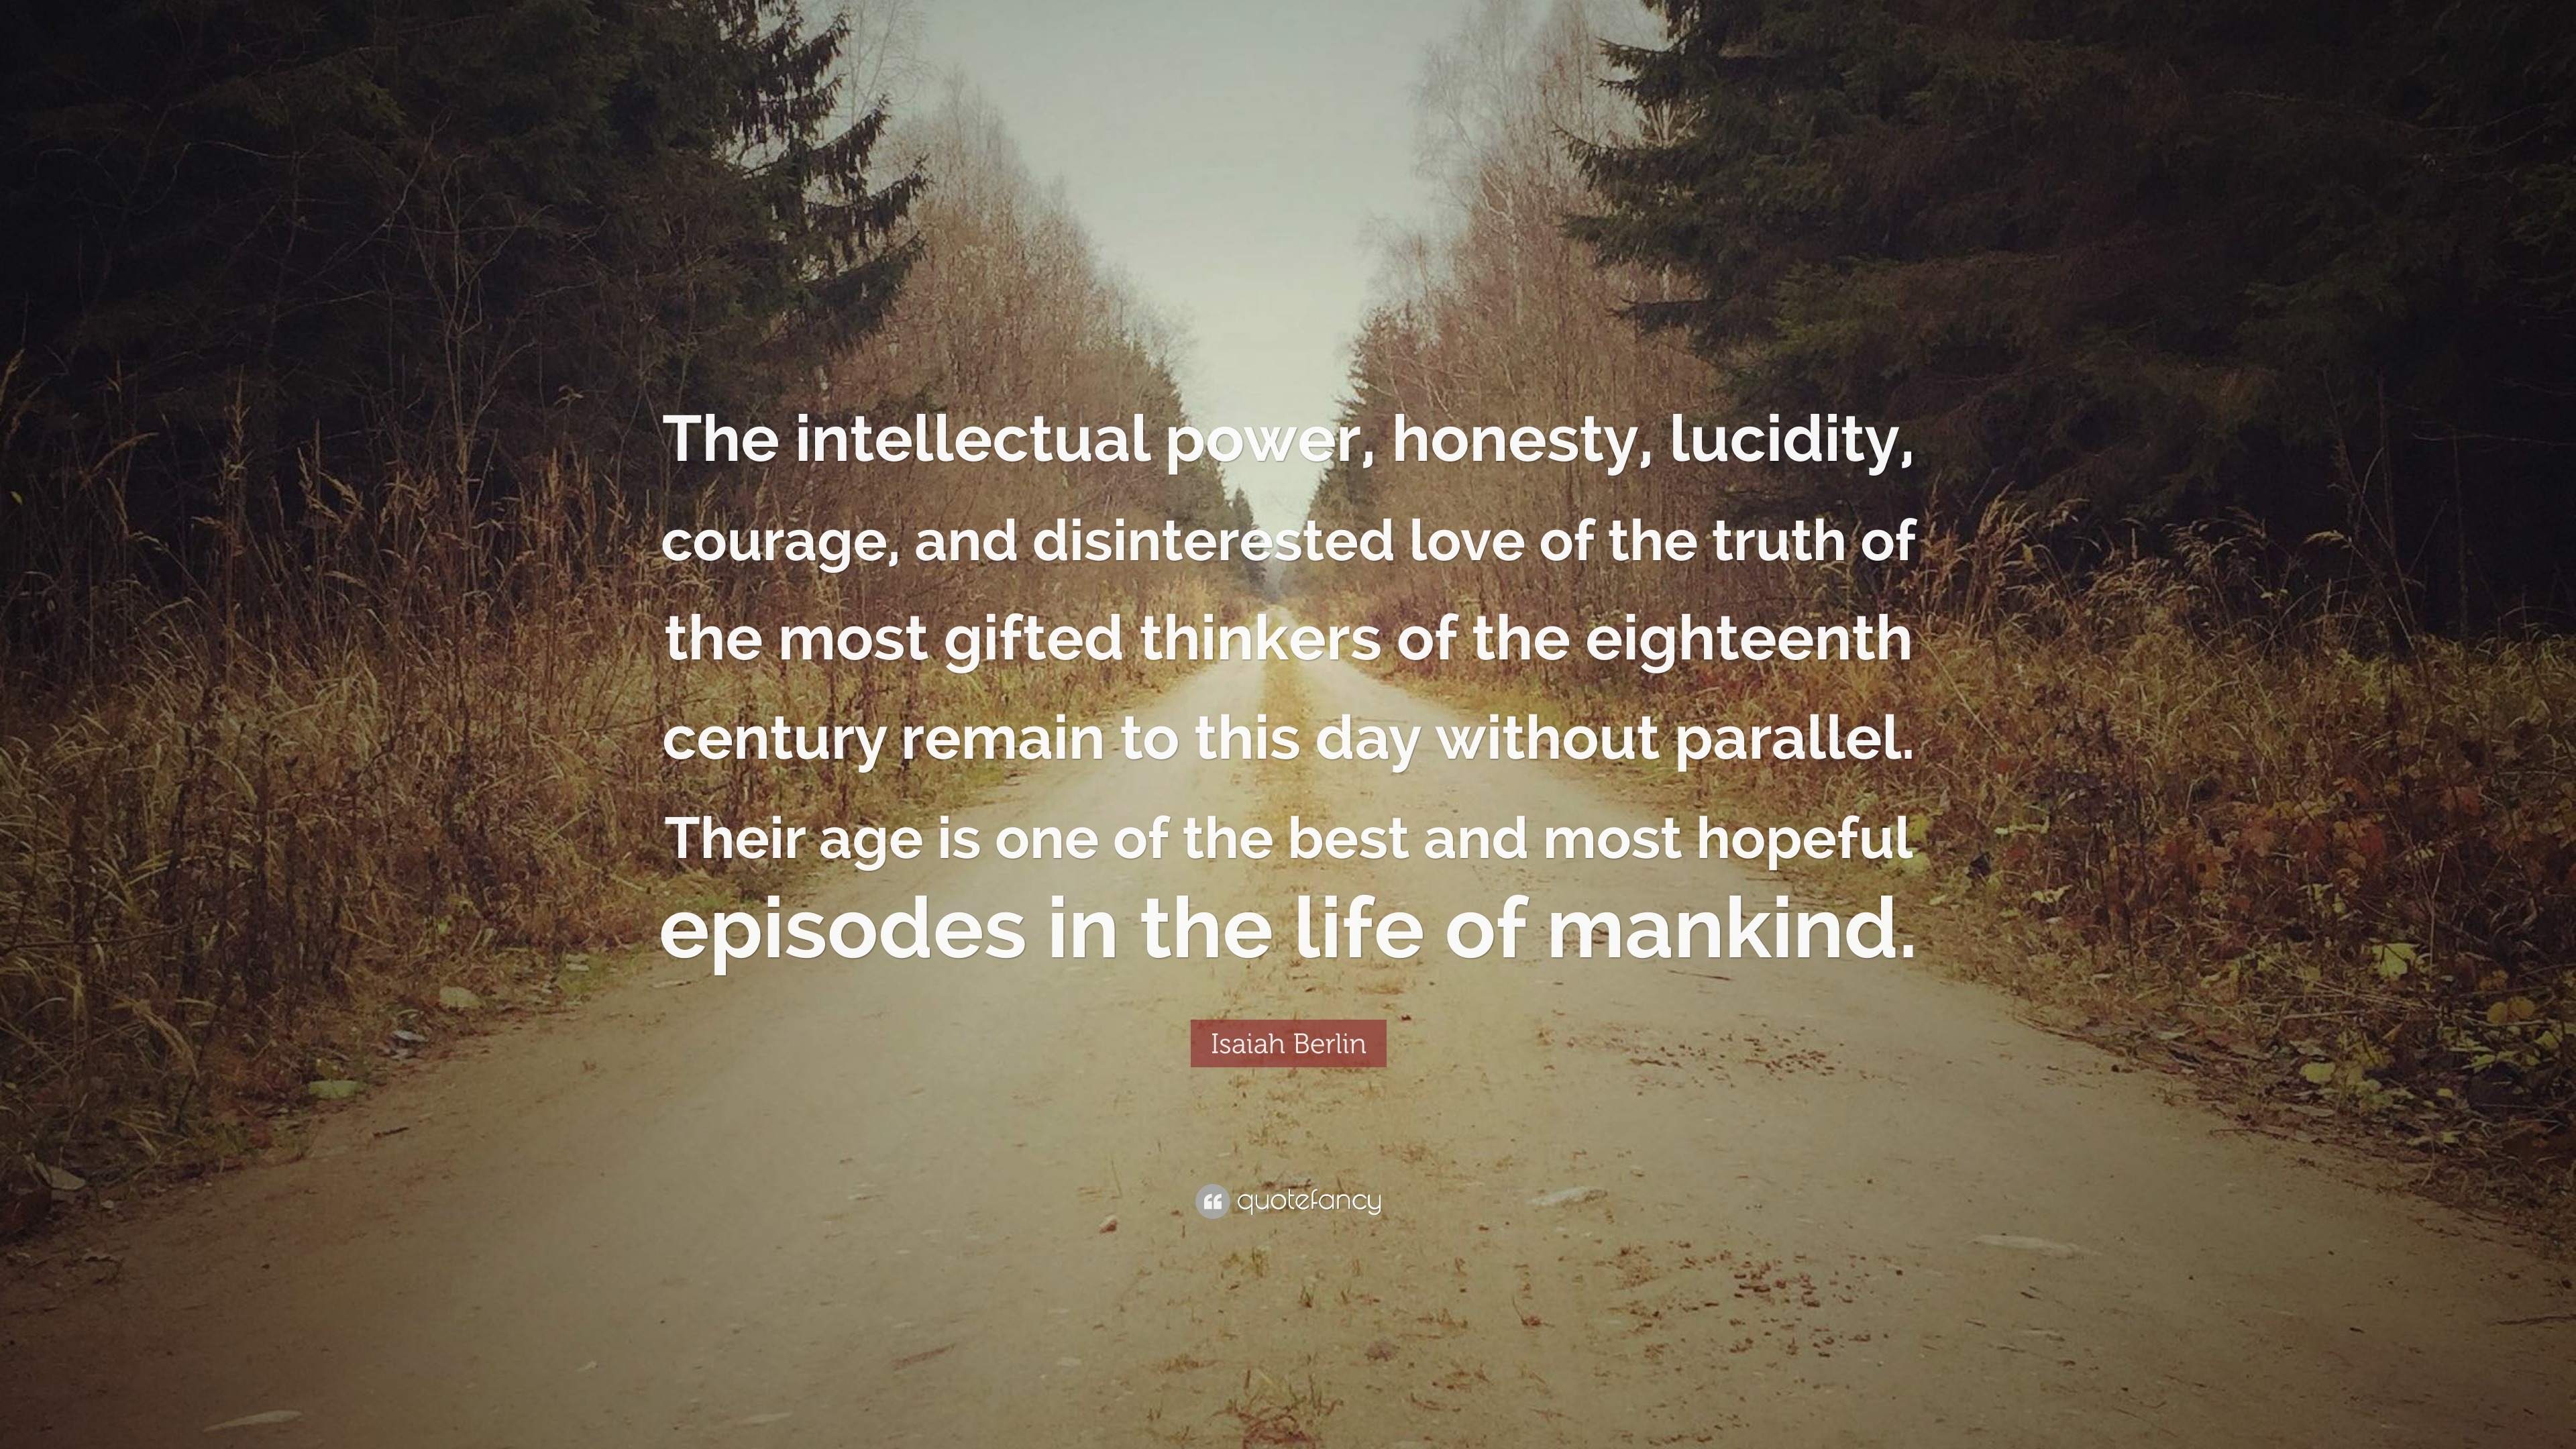 Isaiah Berlin Quote “The intellectual power honesty lucidity courage and